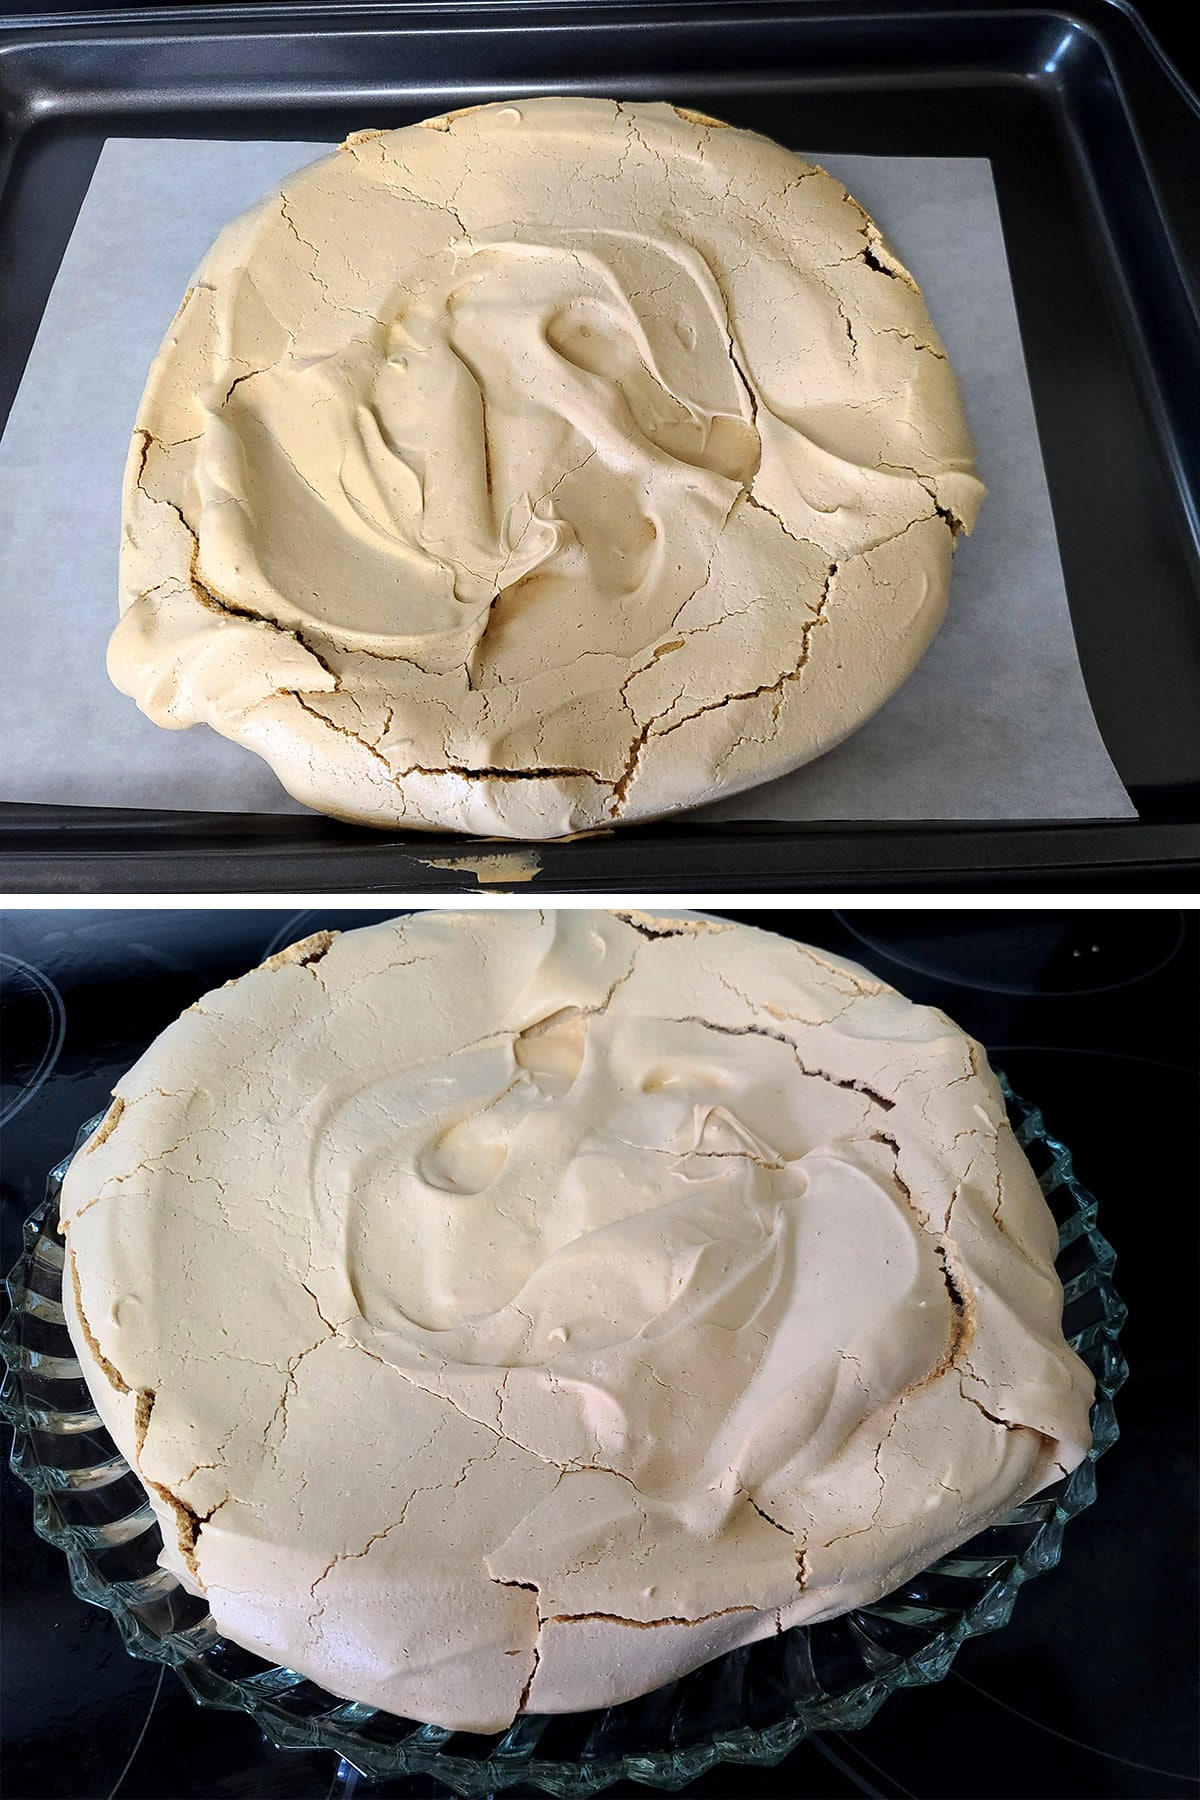 The baked pavlova, both on the pan, and after being transferred to a serving plate.